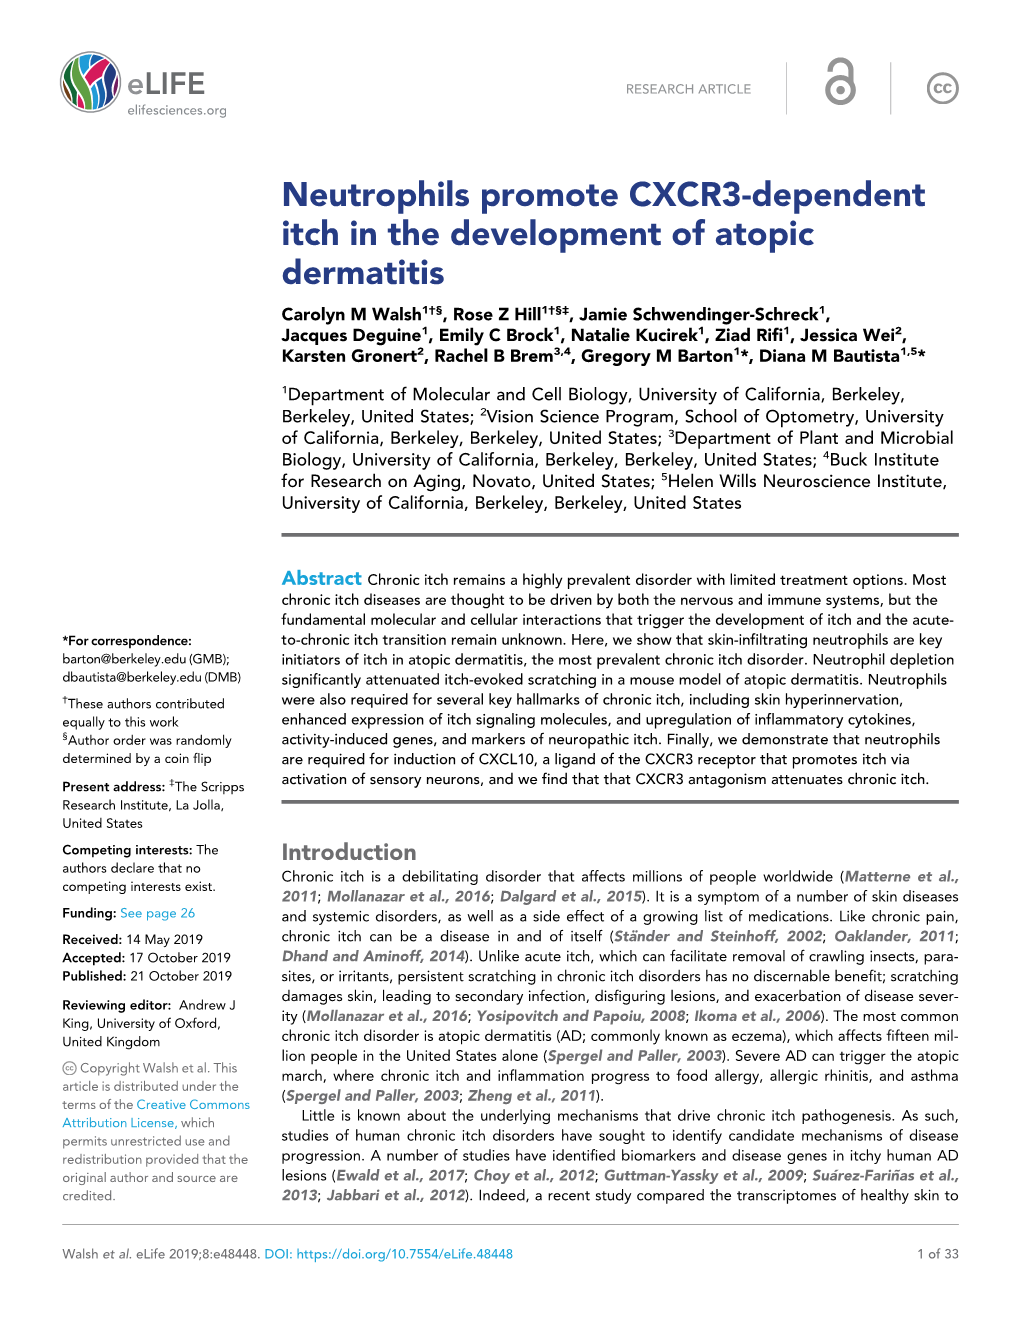 Neutrophils Promote CXCR3-Dependent Itch in the Development of Atopic Dermatitis